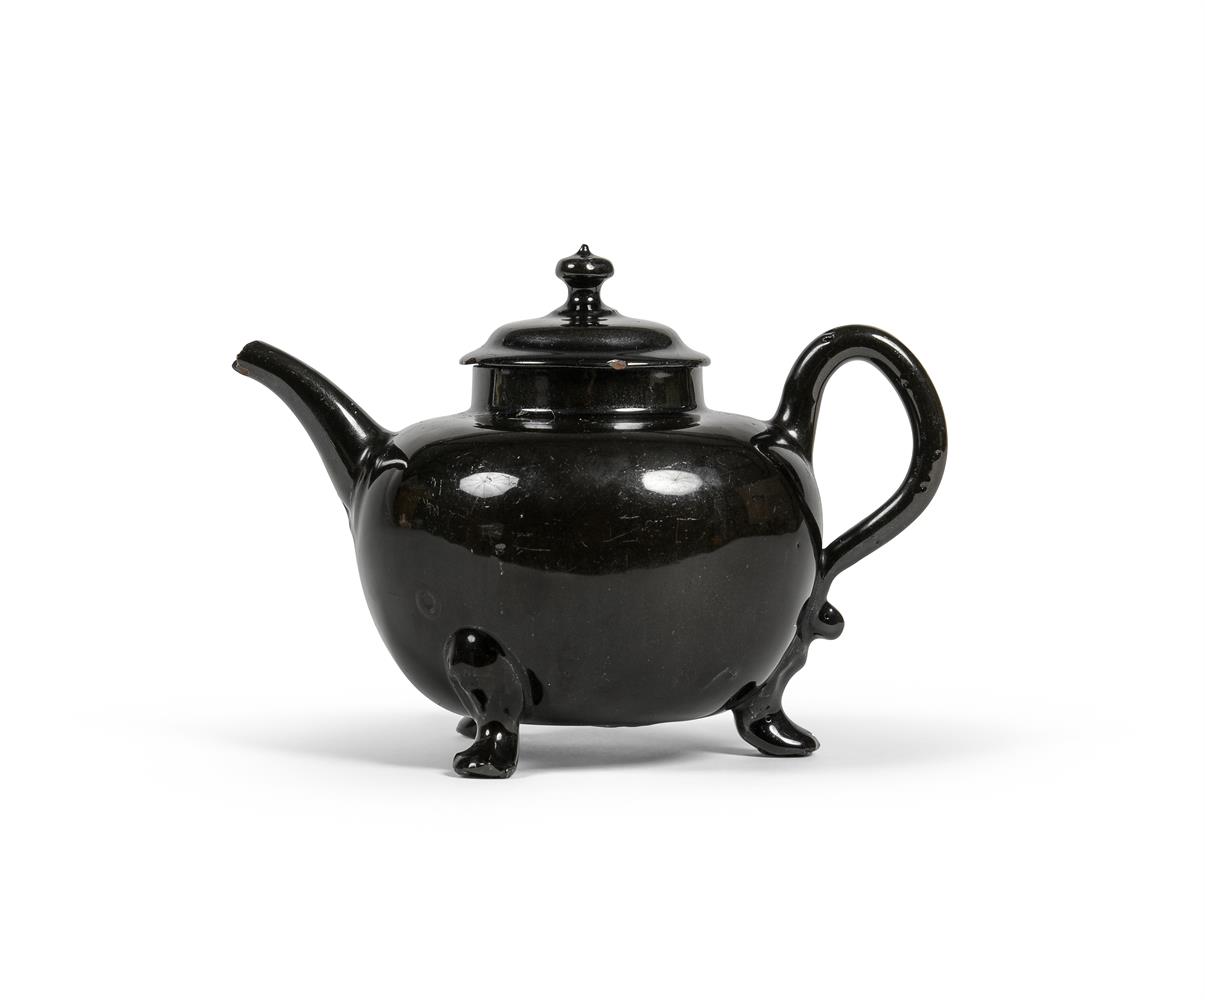 AN ENGLISH BLACK-GLAZED RED POTTERY TEAPOT AND COVER OF JACKFIELD POTTERY TYPE MID 18TH CENTURY - Image 2 of 2